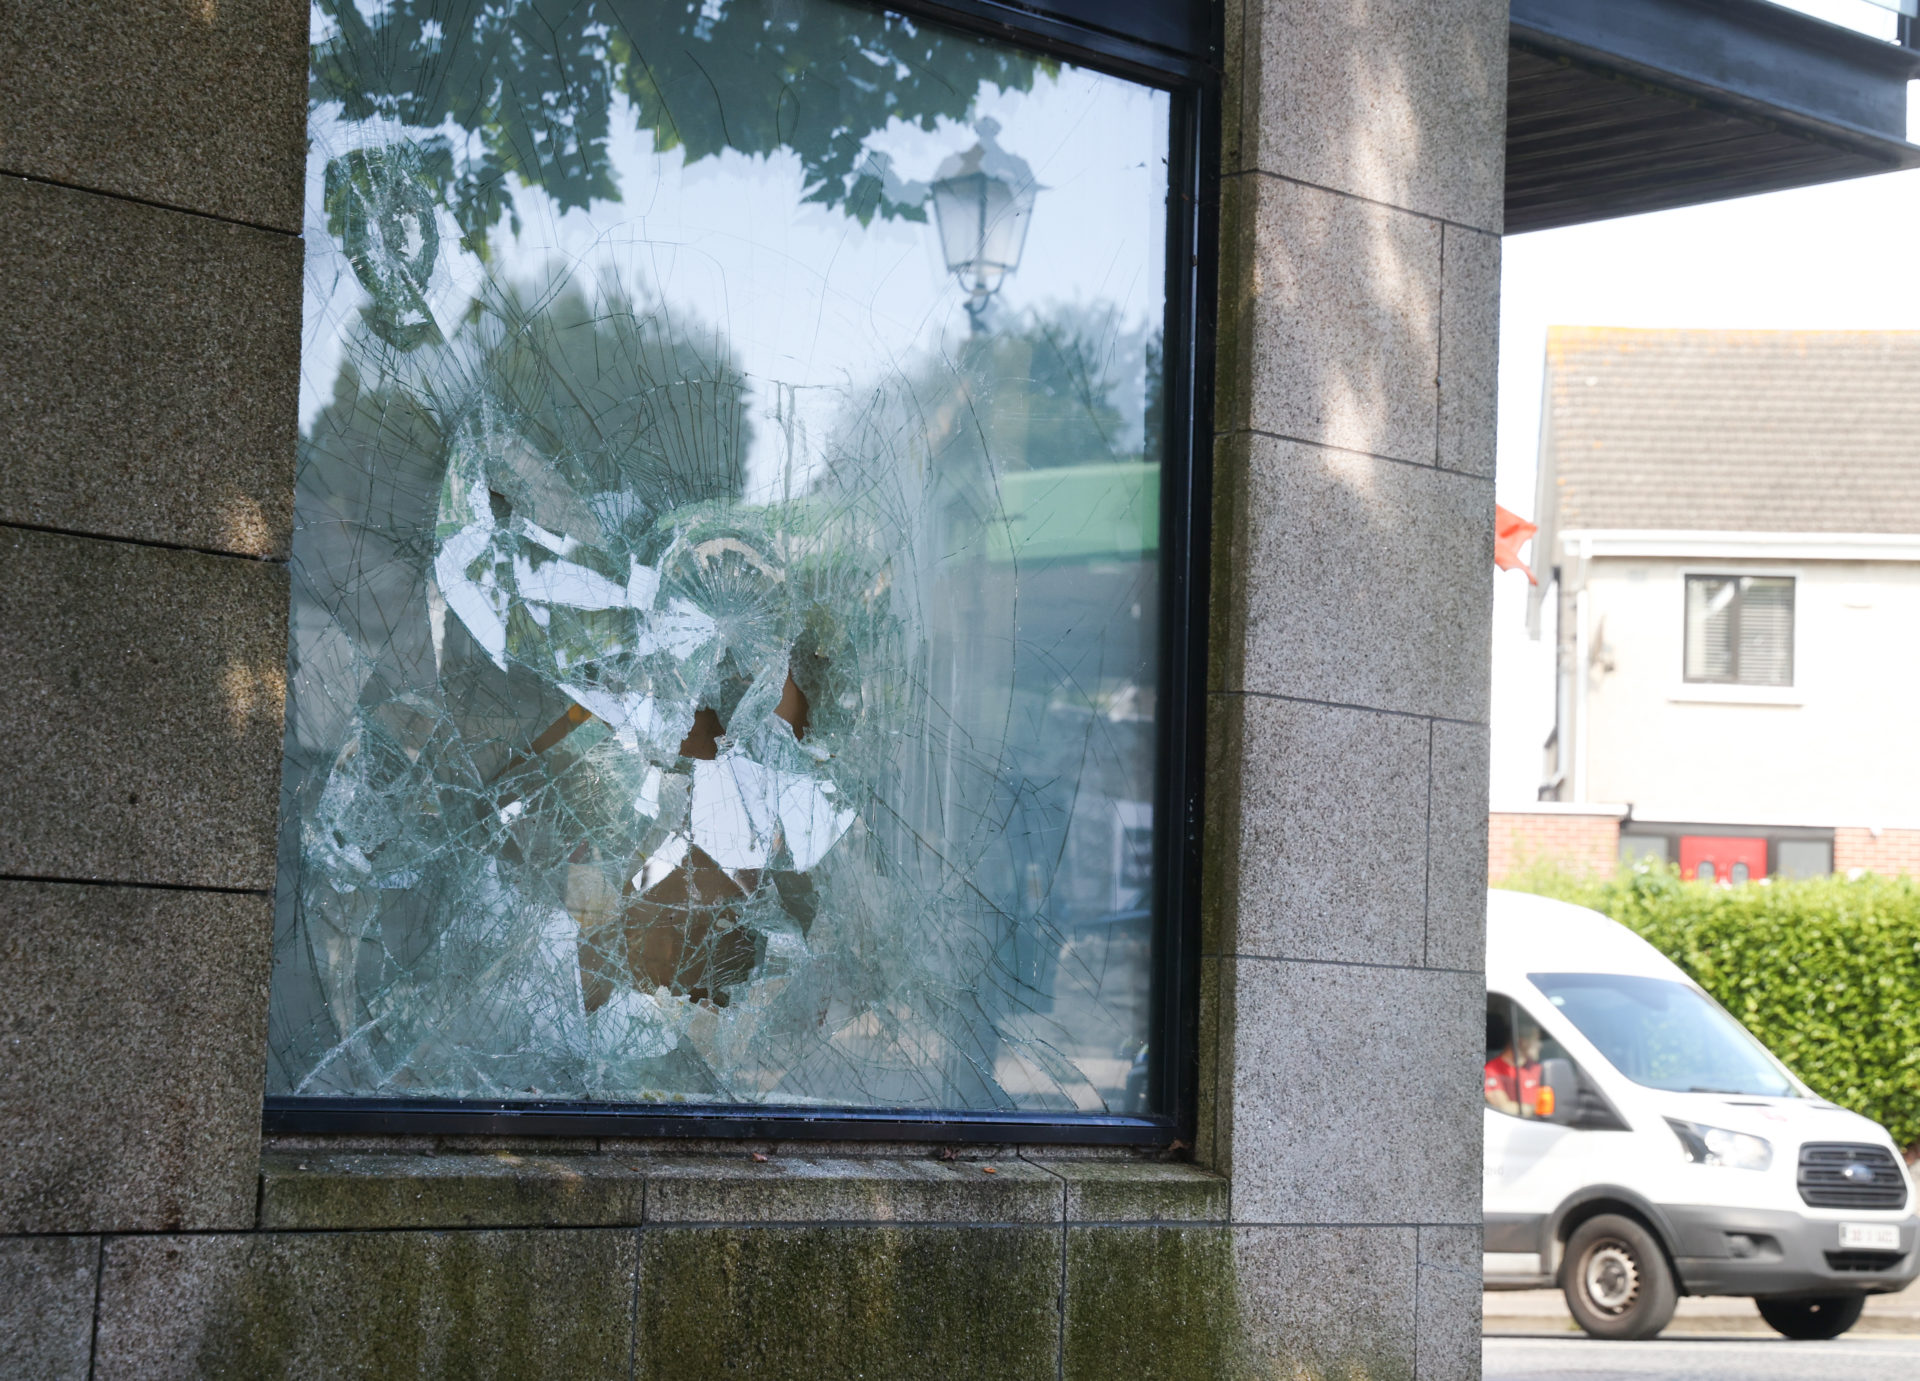 A building in Ballybrack which suffered damage during an anti-asylum seeker protest.